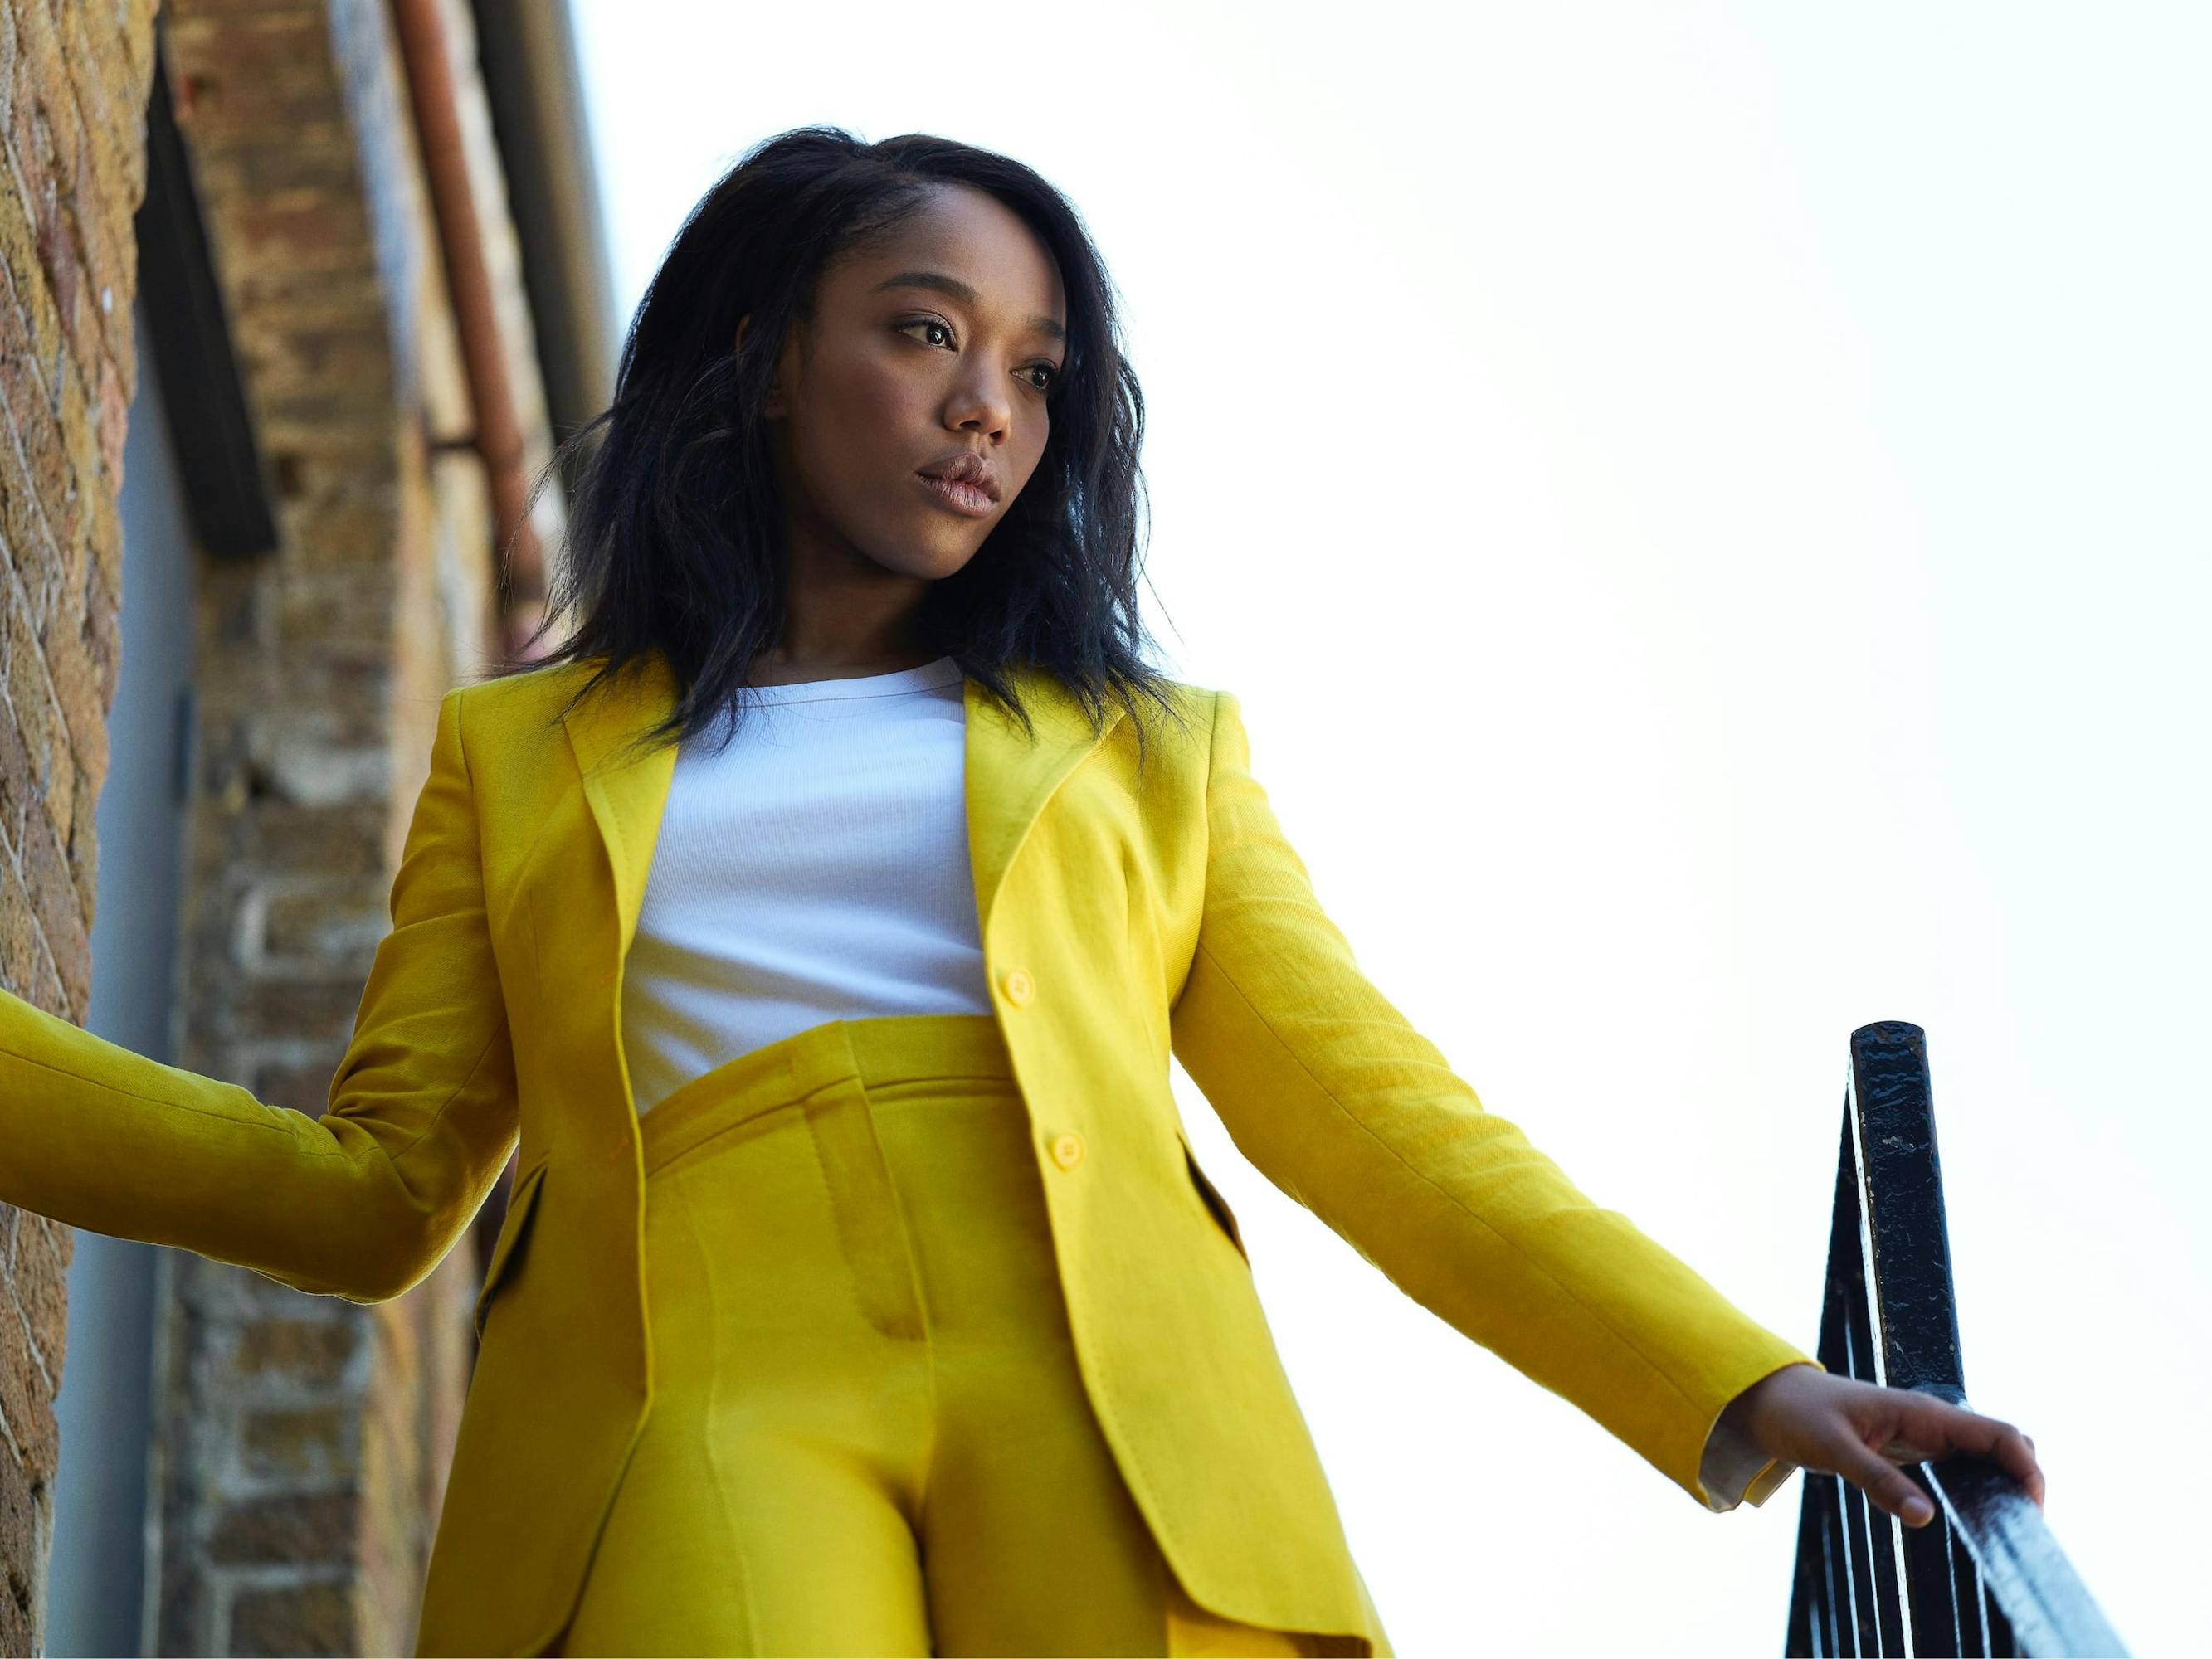 Naomi Ackie wears a vibrant yellow suit with a white top.  She stands at the top of some steps outside a brick building, her hand on the railing, gazing downwards